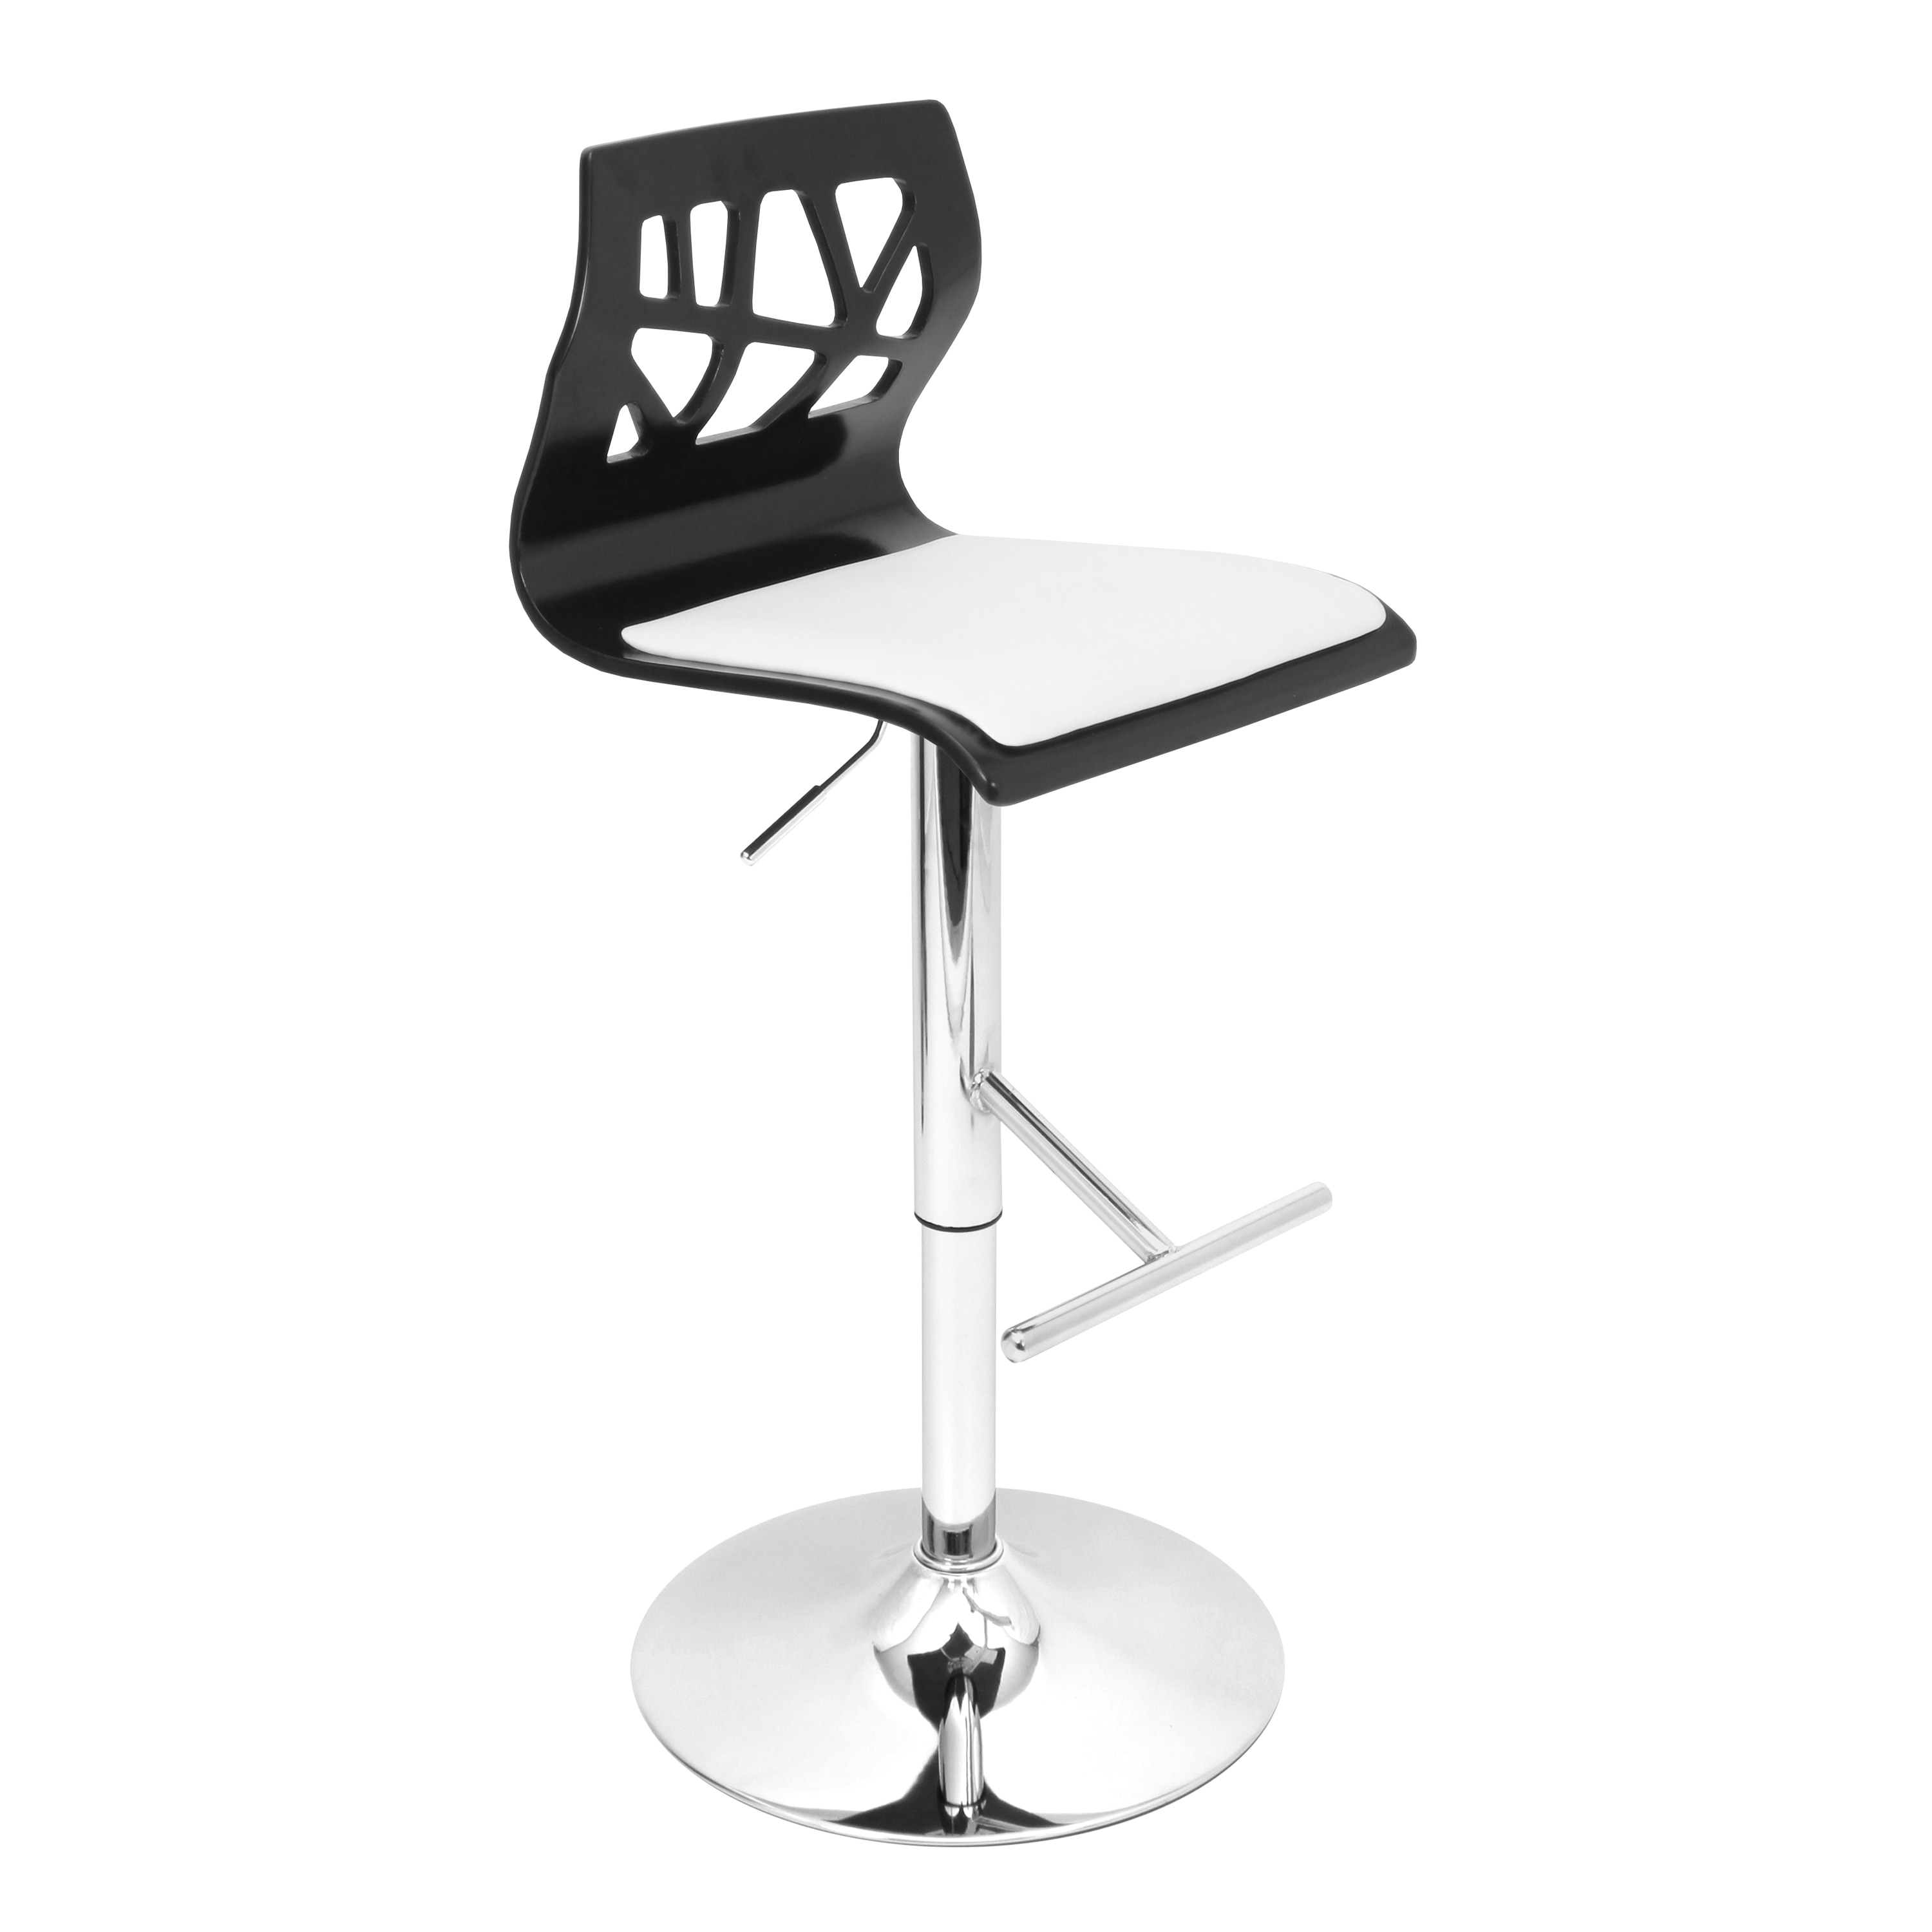 Folia Black Wood Adjustable Barstool (Black wood, white seatMaterials Wood, PU, foam, chromeHardware finish Chrome base, pole and footrestNumber of Stools OneSeat height Adjusts from 26 to 31 inchesBackrest height 12 inchesSeat dimensions 16 inches 